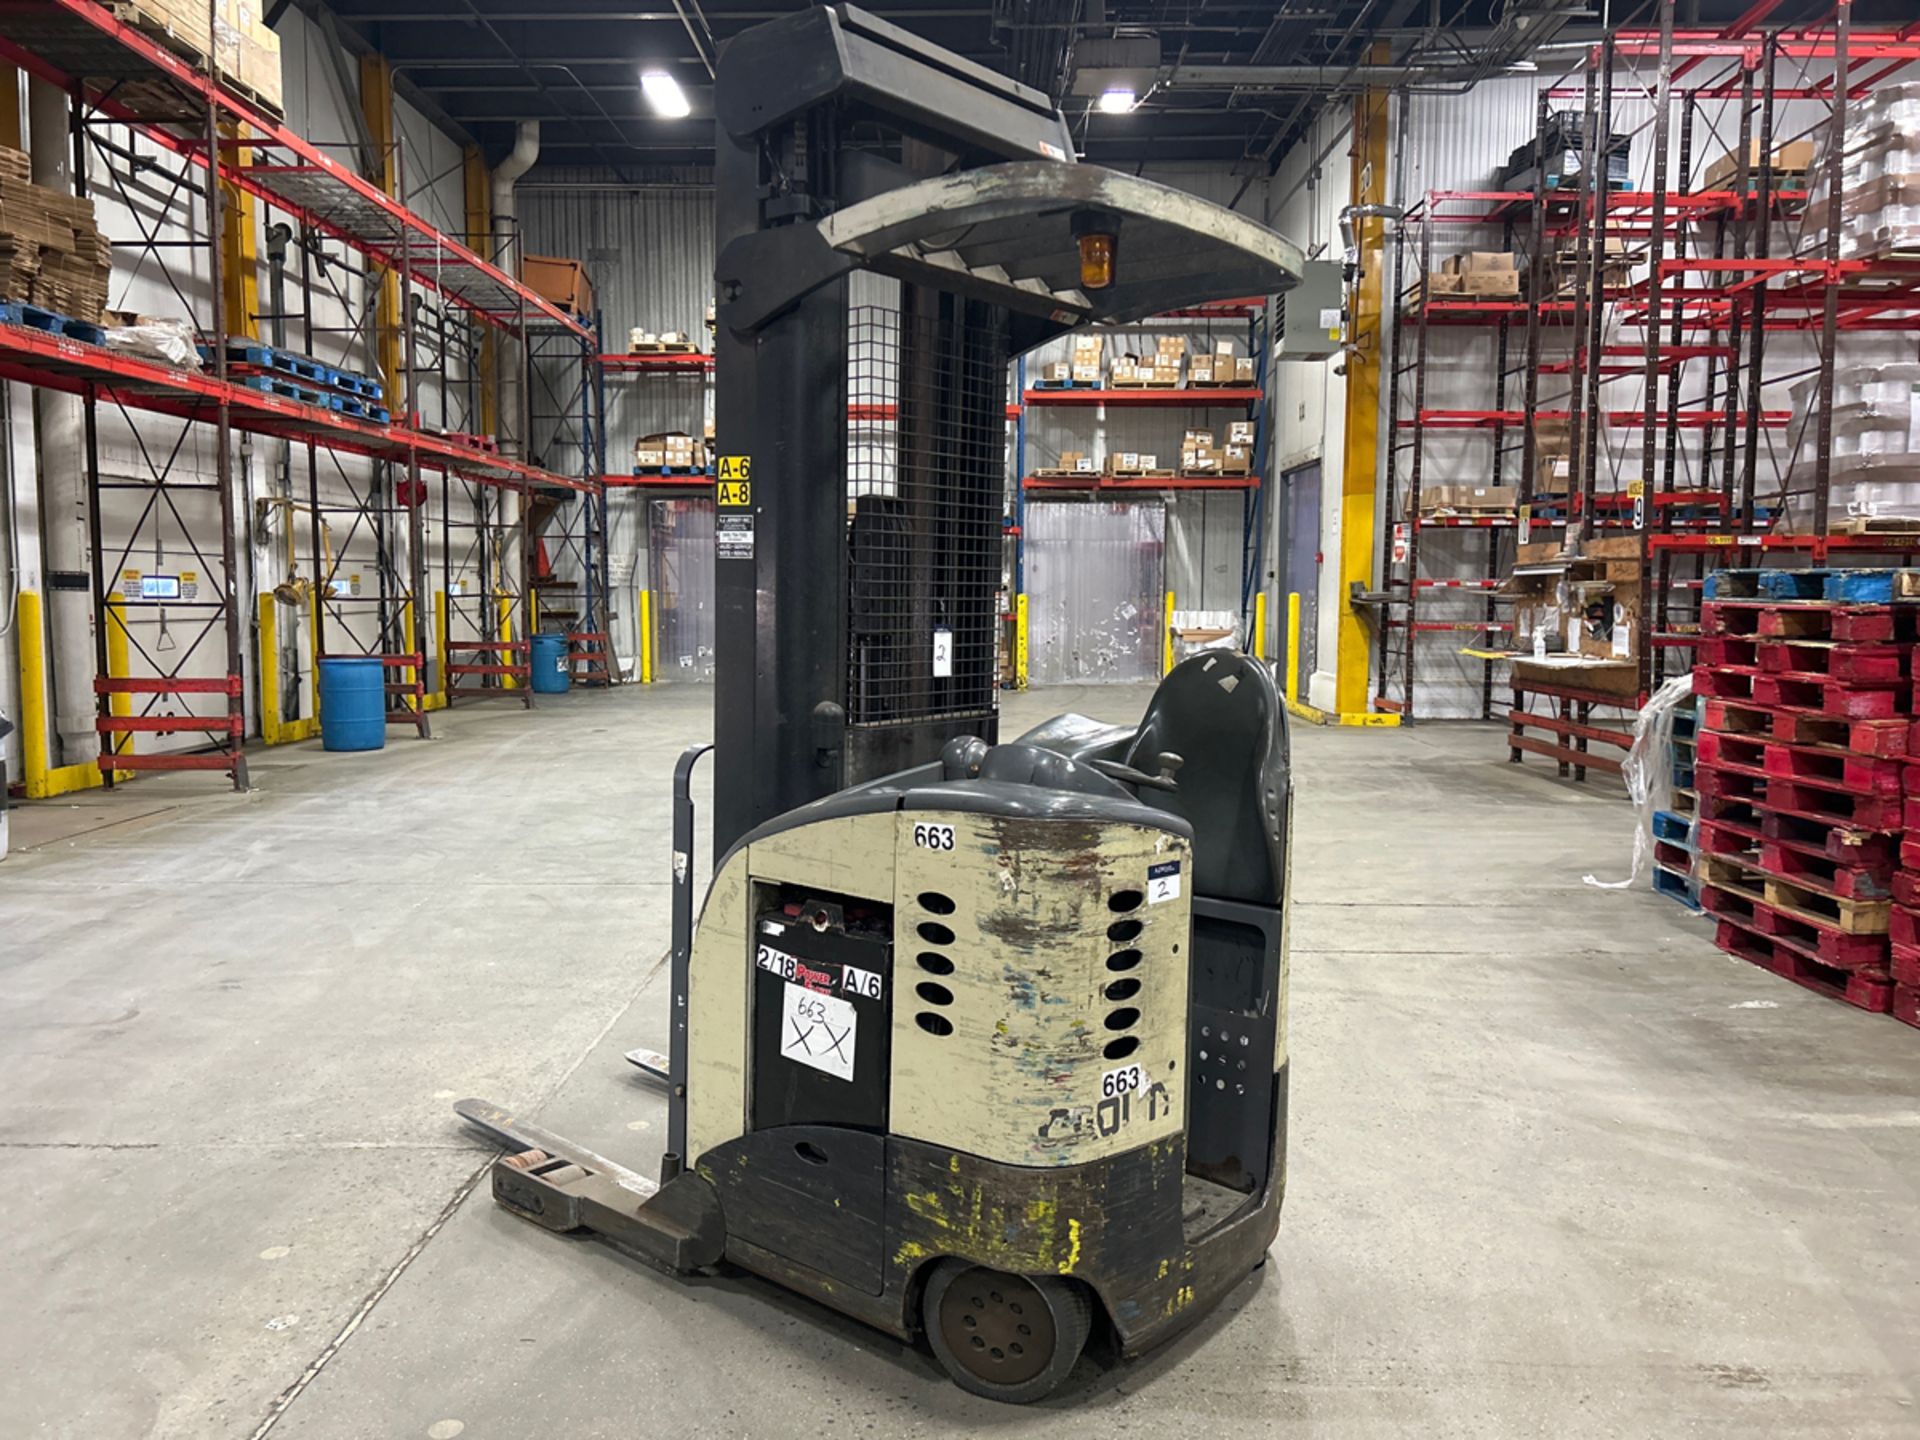 Crown RR5020-35 3,500lbs Electric 36V Reach Truck w/ Charger